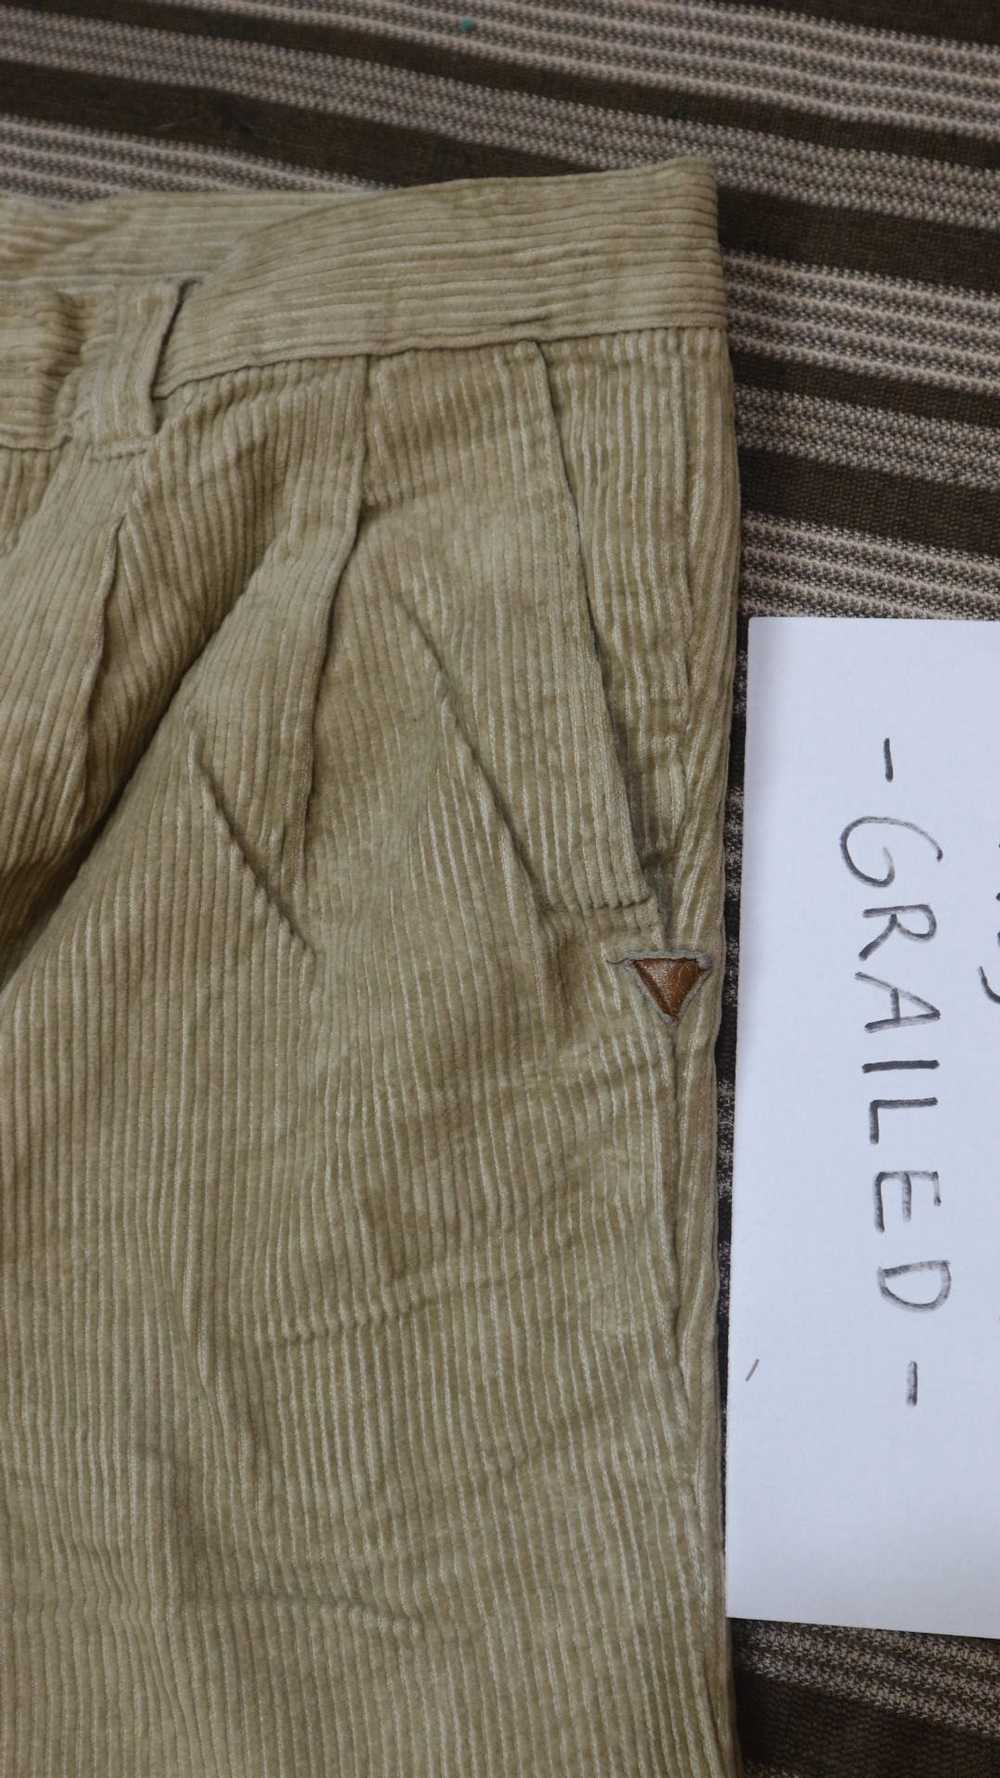 Japanese Brand Corduroy Pant by Blue Way - image 3